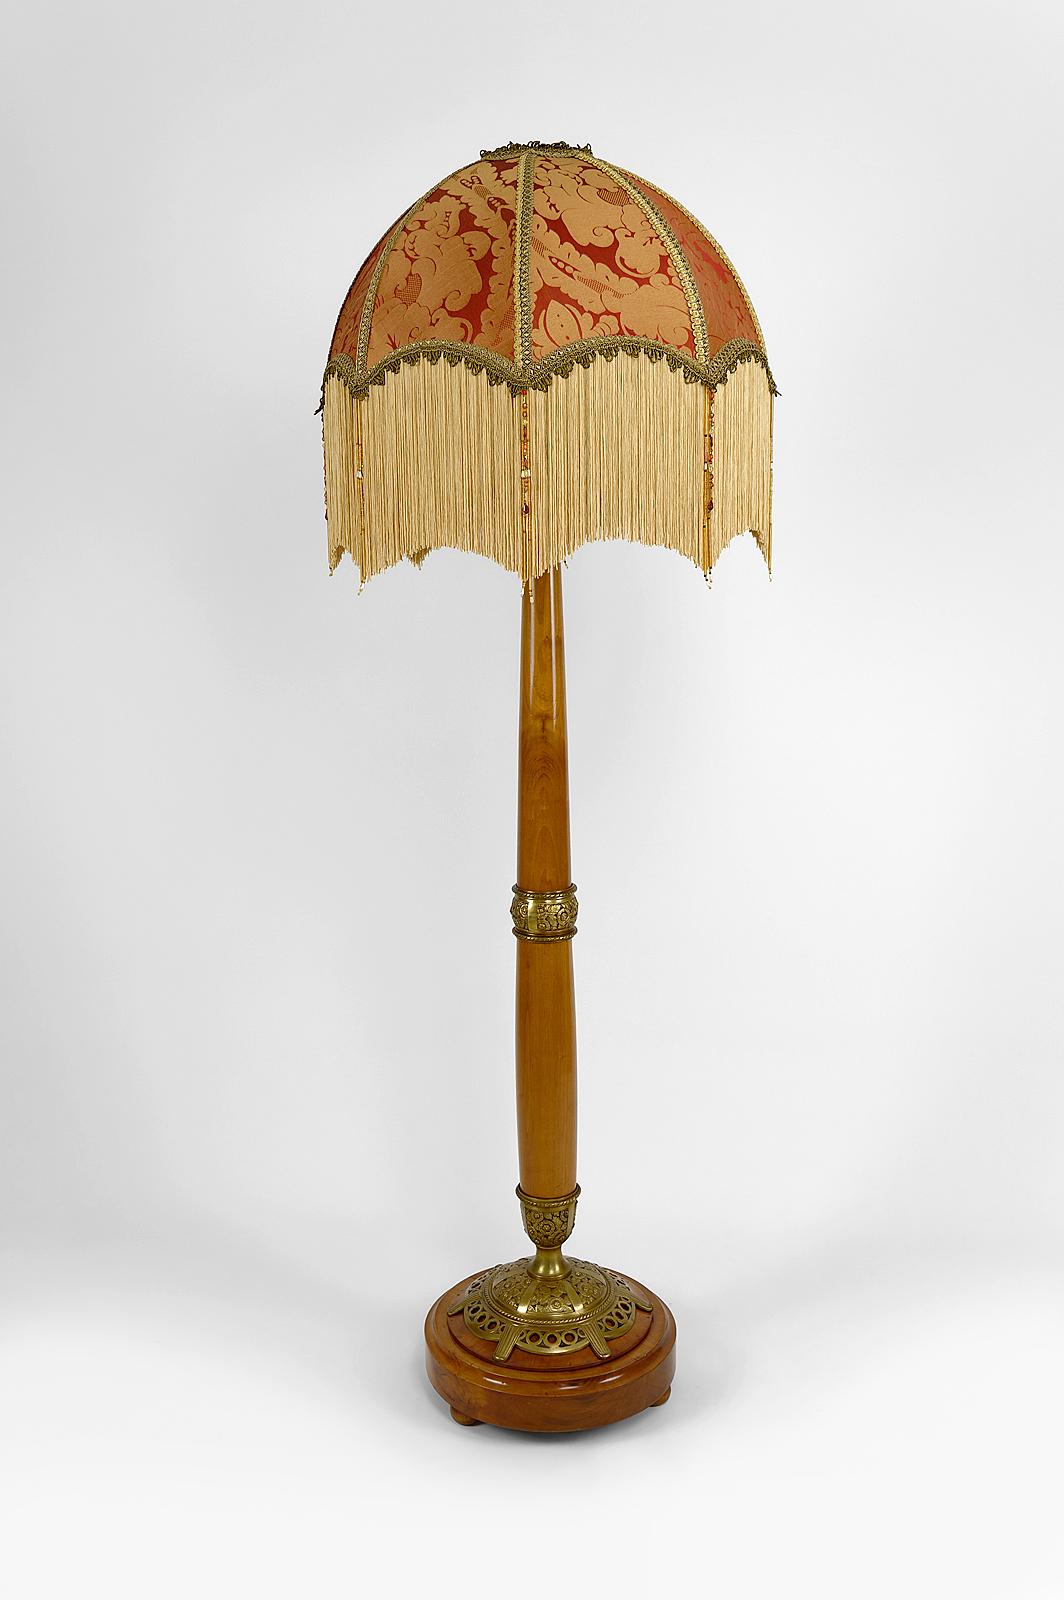 Superb floor lamp in blond cherry wood composed of a molded round base and a tapered shaft, enhanced with decorative elements in gilded bronze with stylized floral motifs.

The whole is mounted with a red and gold colored umbrella dome lampshade,